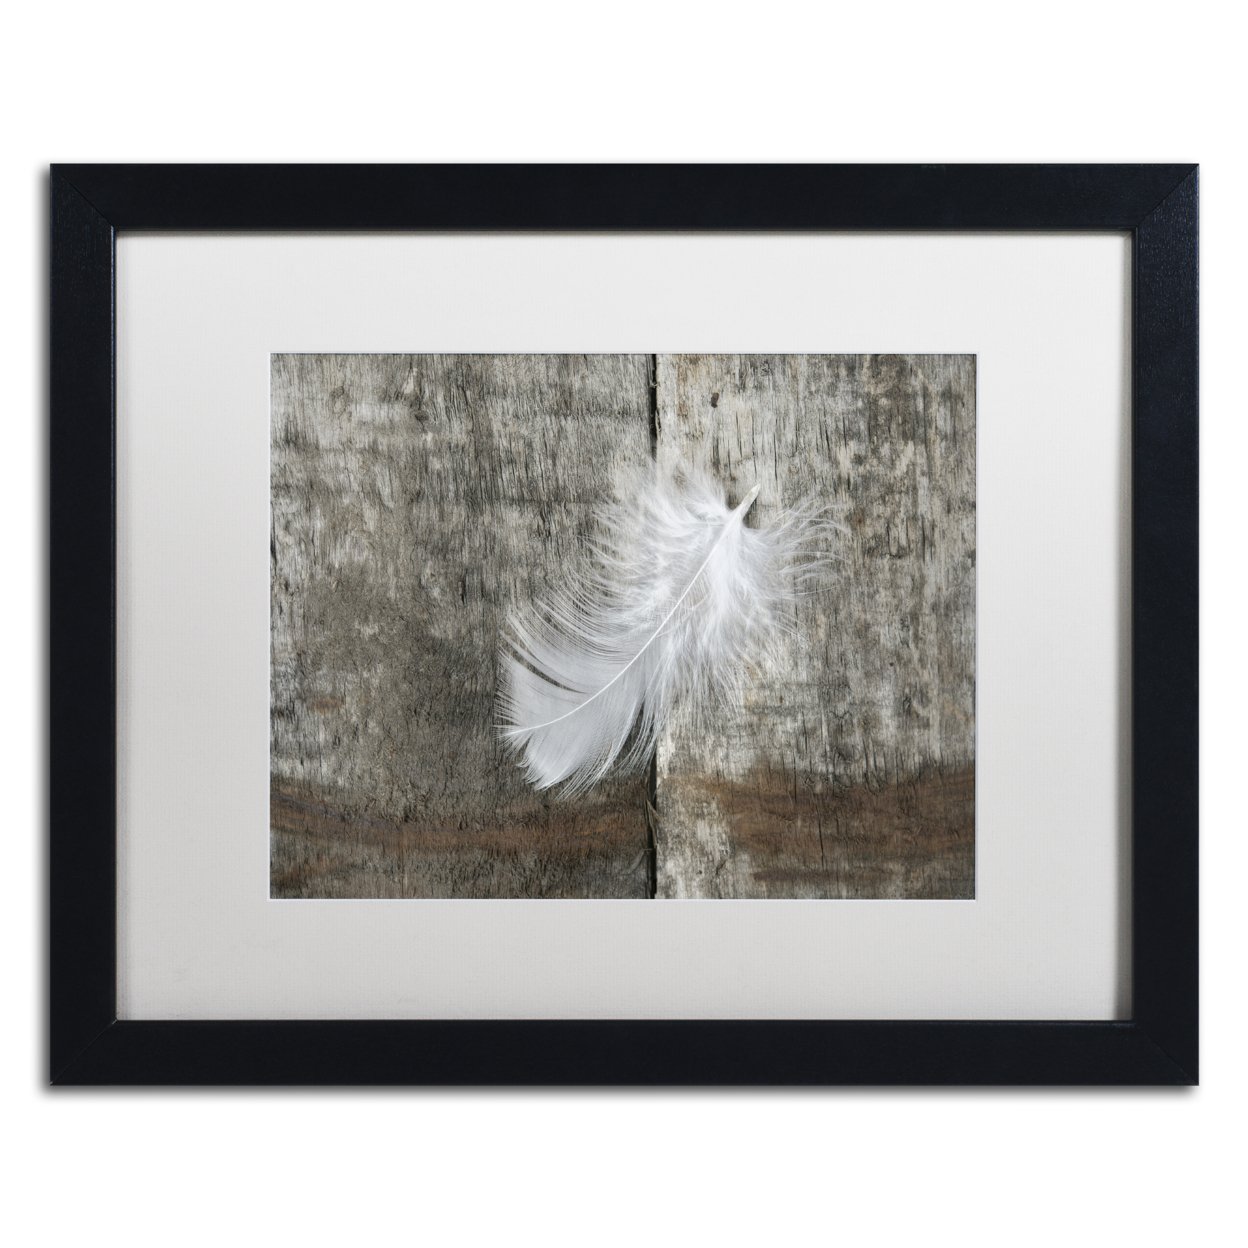 Cora Niele 'White Feather On Rough Wood' Black Wooden Framed Art 18 X 22 Inches